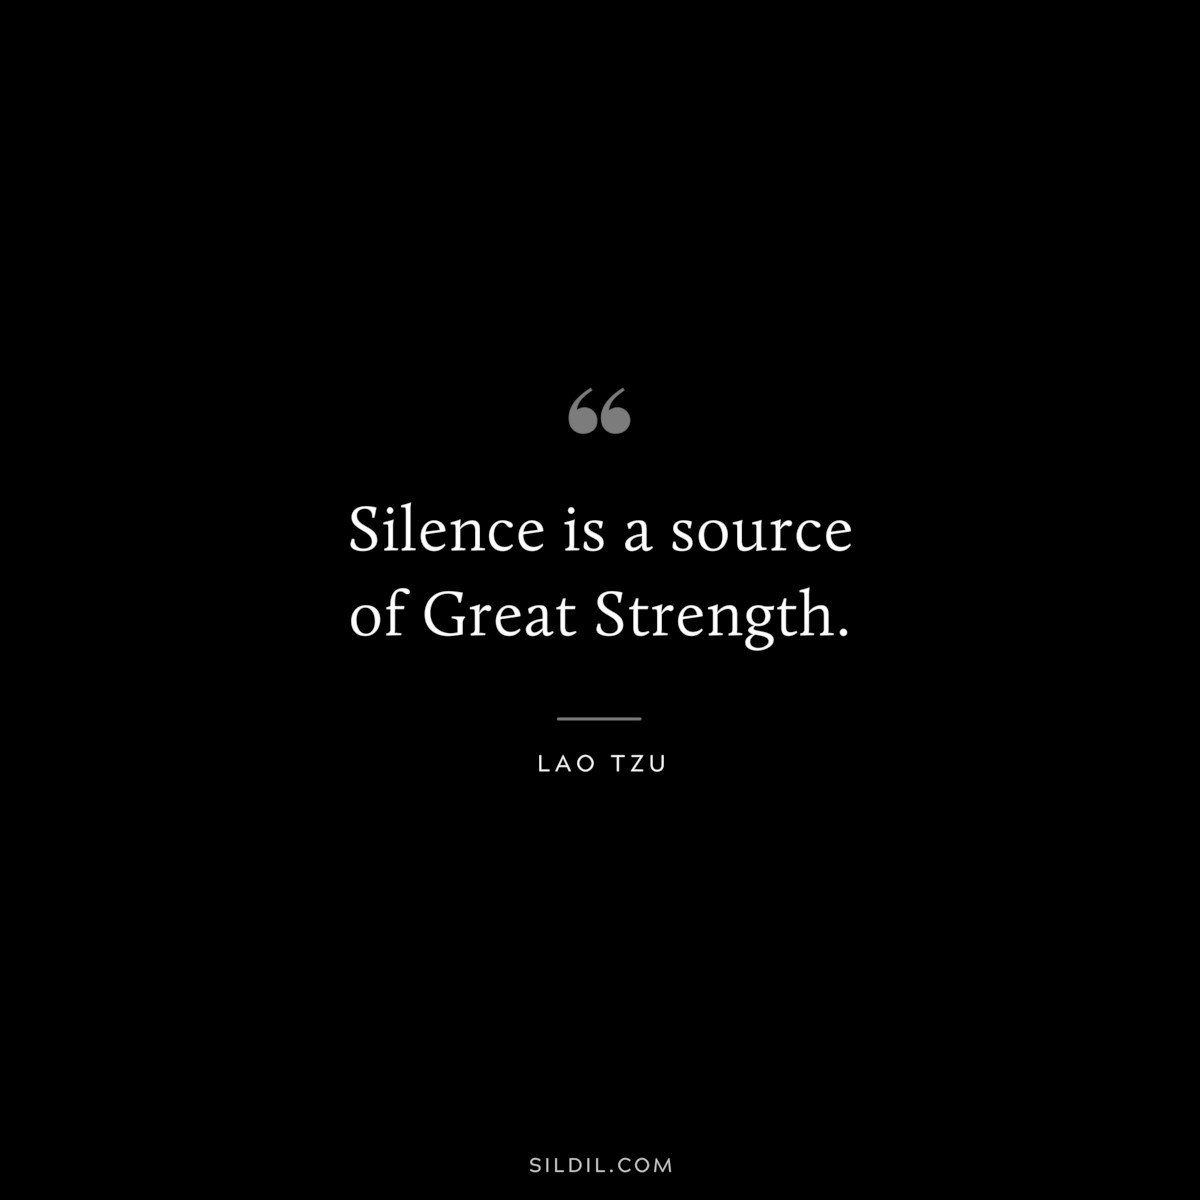 Silence is a source of Great Strength. ― Lao Tzu